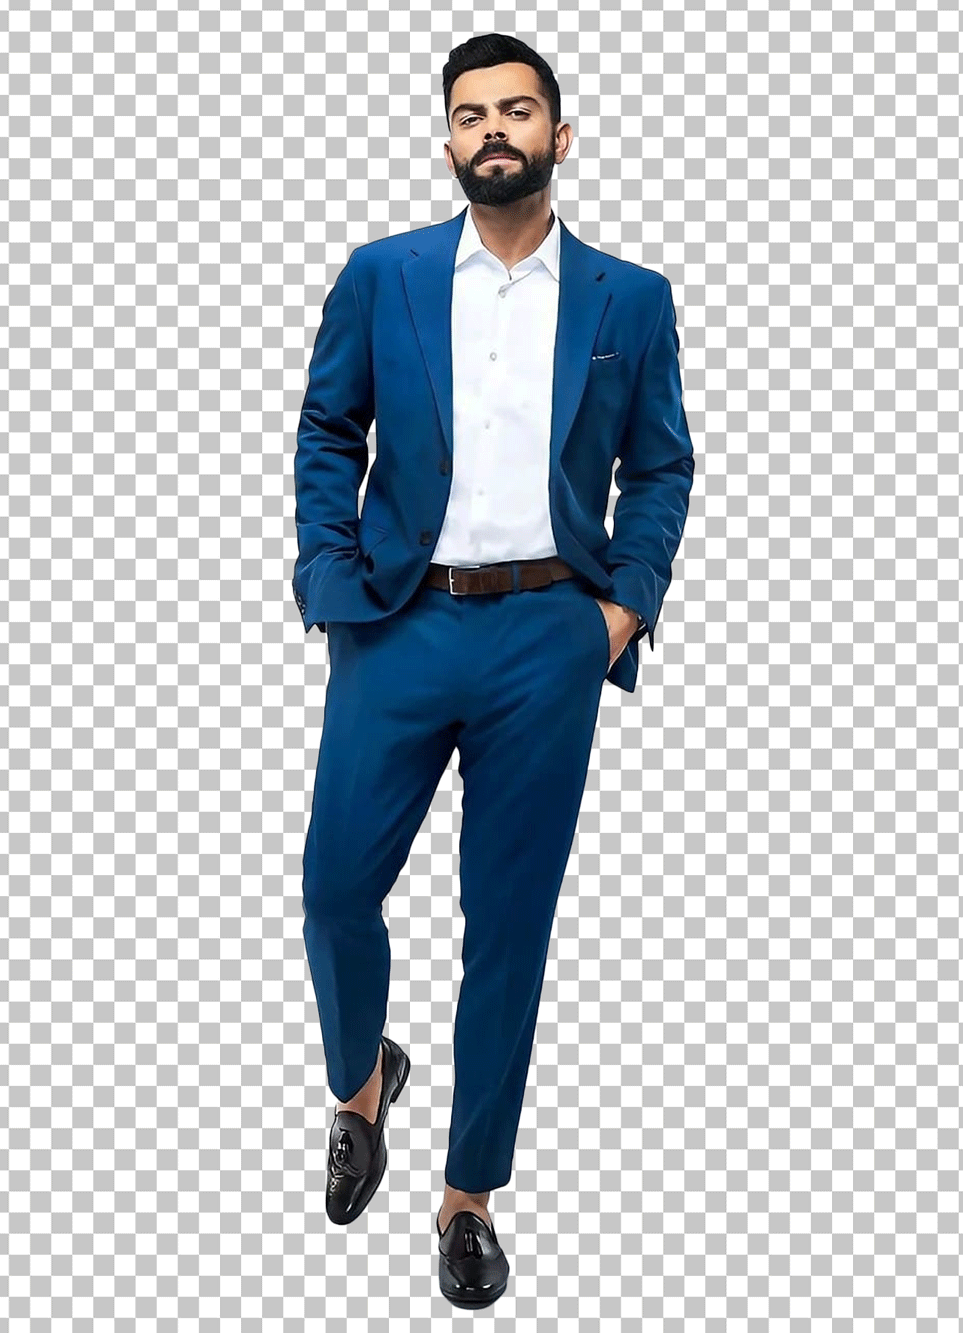 A PNG image of Virat Kohli, a man in a blue suit, standing on a transparent background.